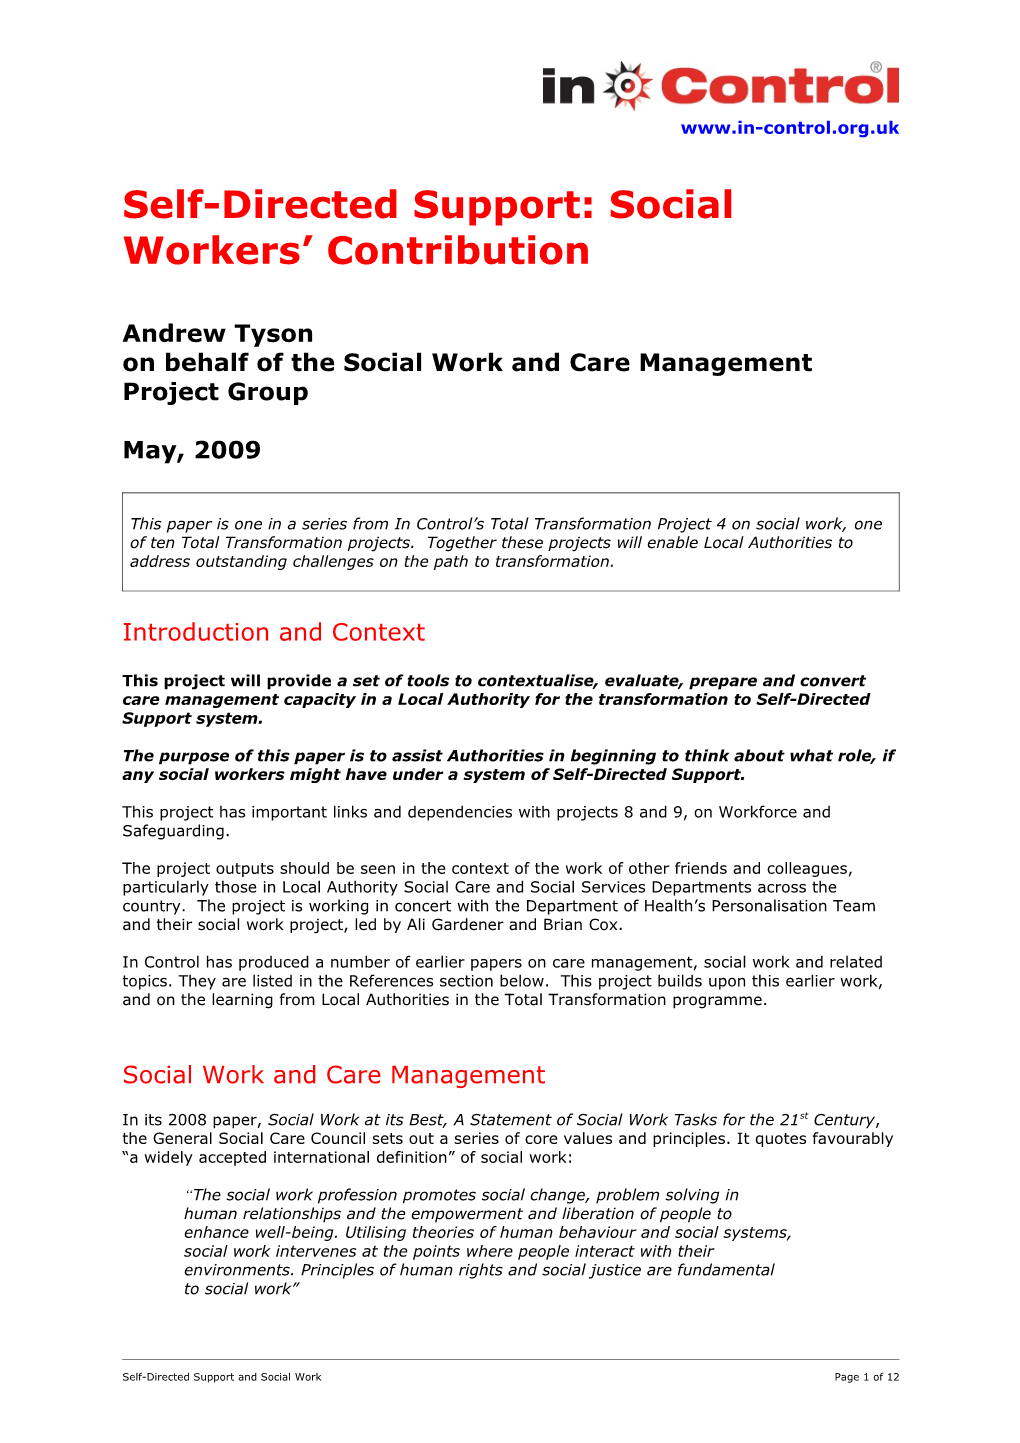 Self-Directed Support: Social Workers Contribution